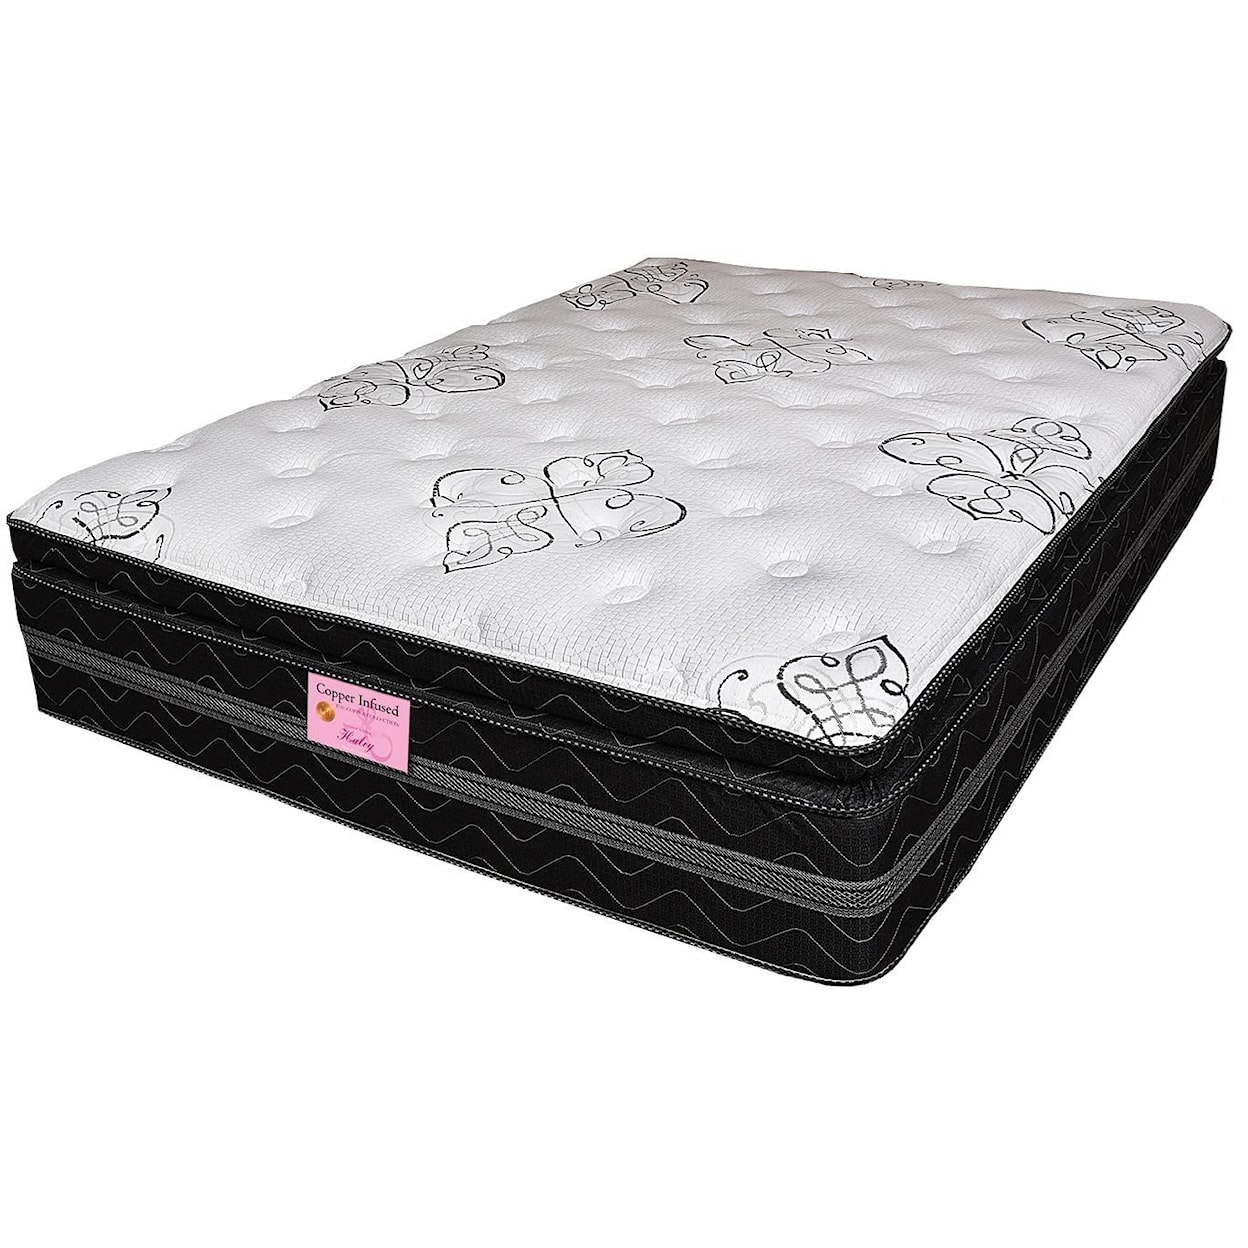 United Bedding Haley P Twin XL Pocketed Coil Mattress